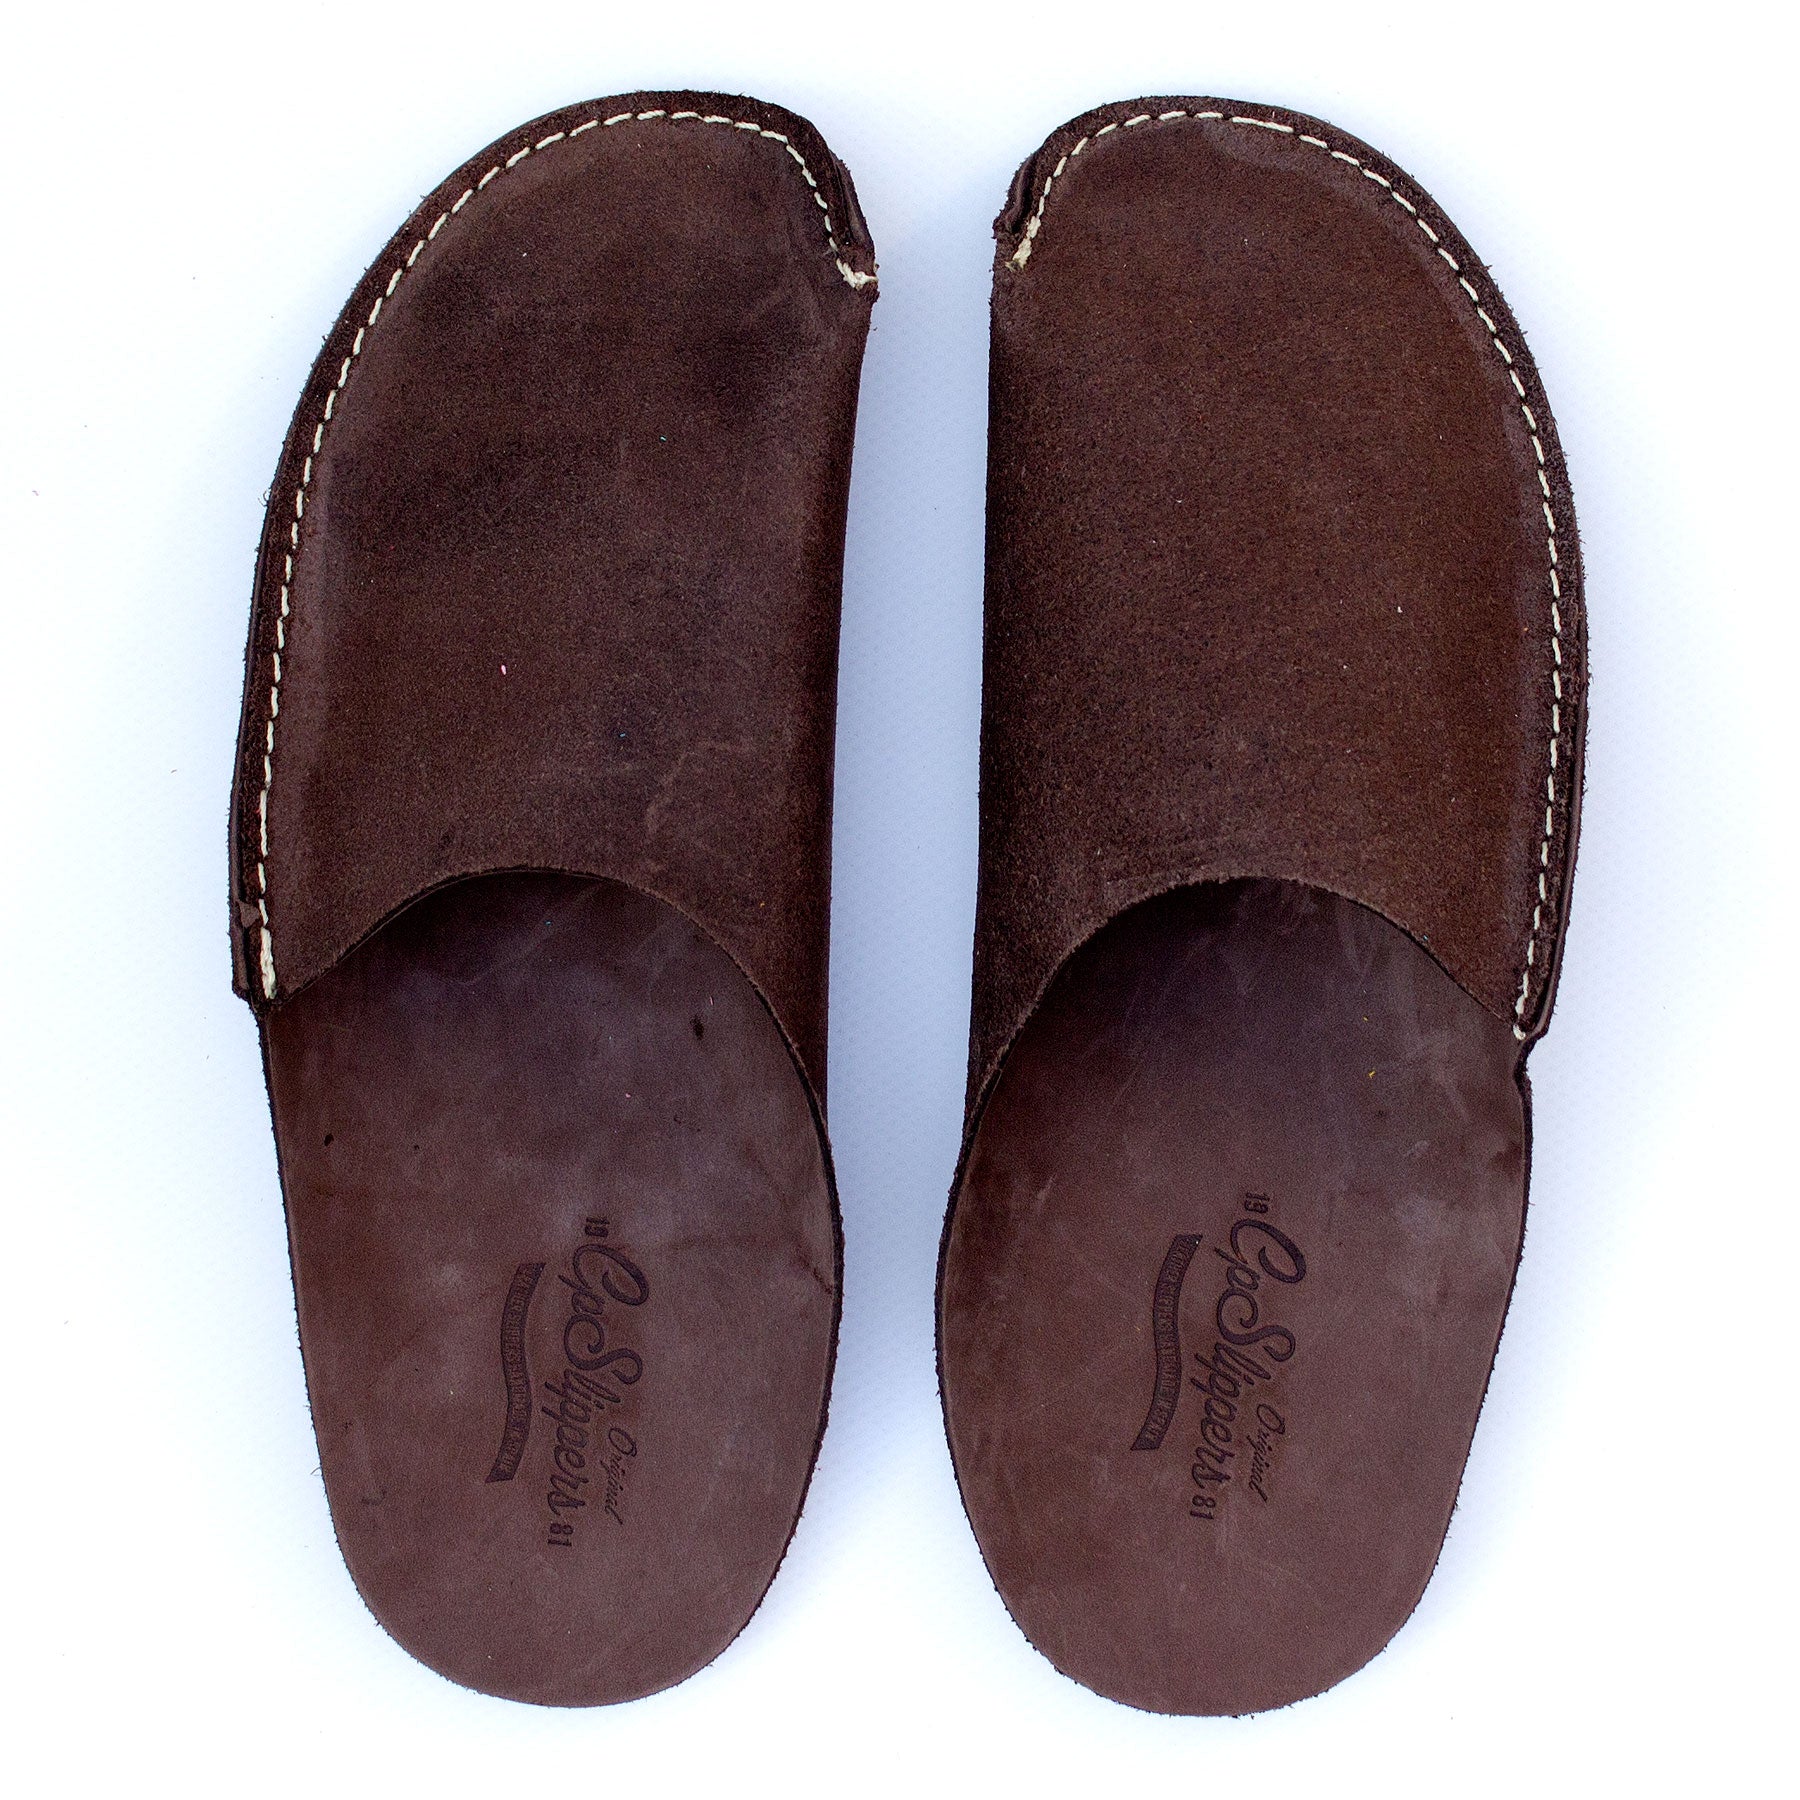 Brown Leather Slippers for Men and Women CP Slippers Minimalist